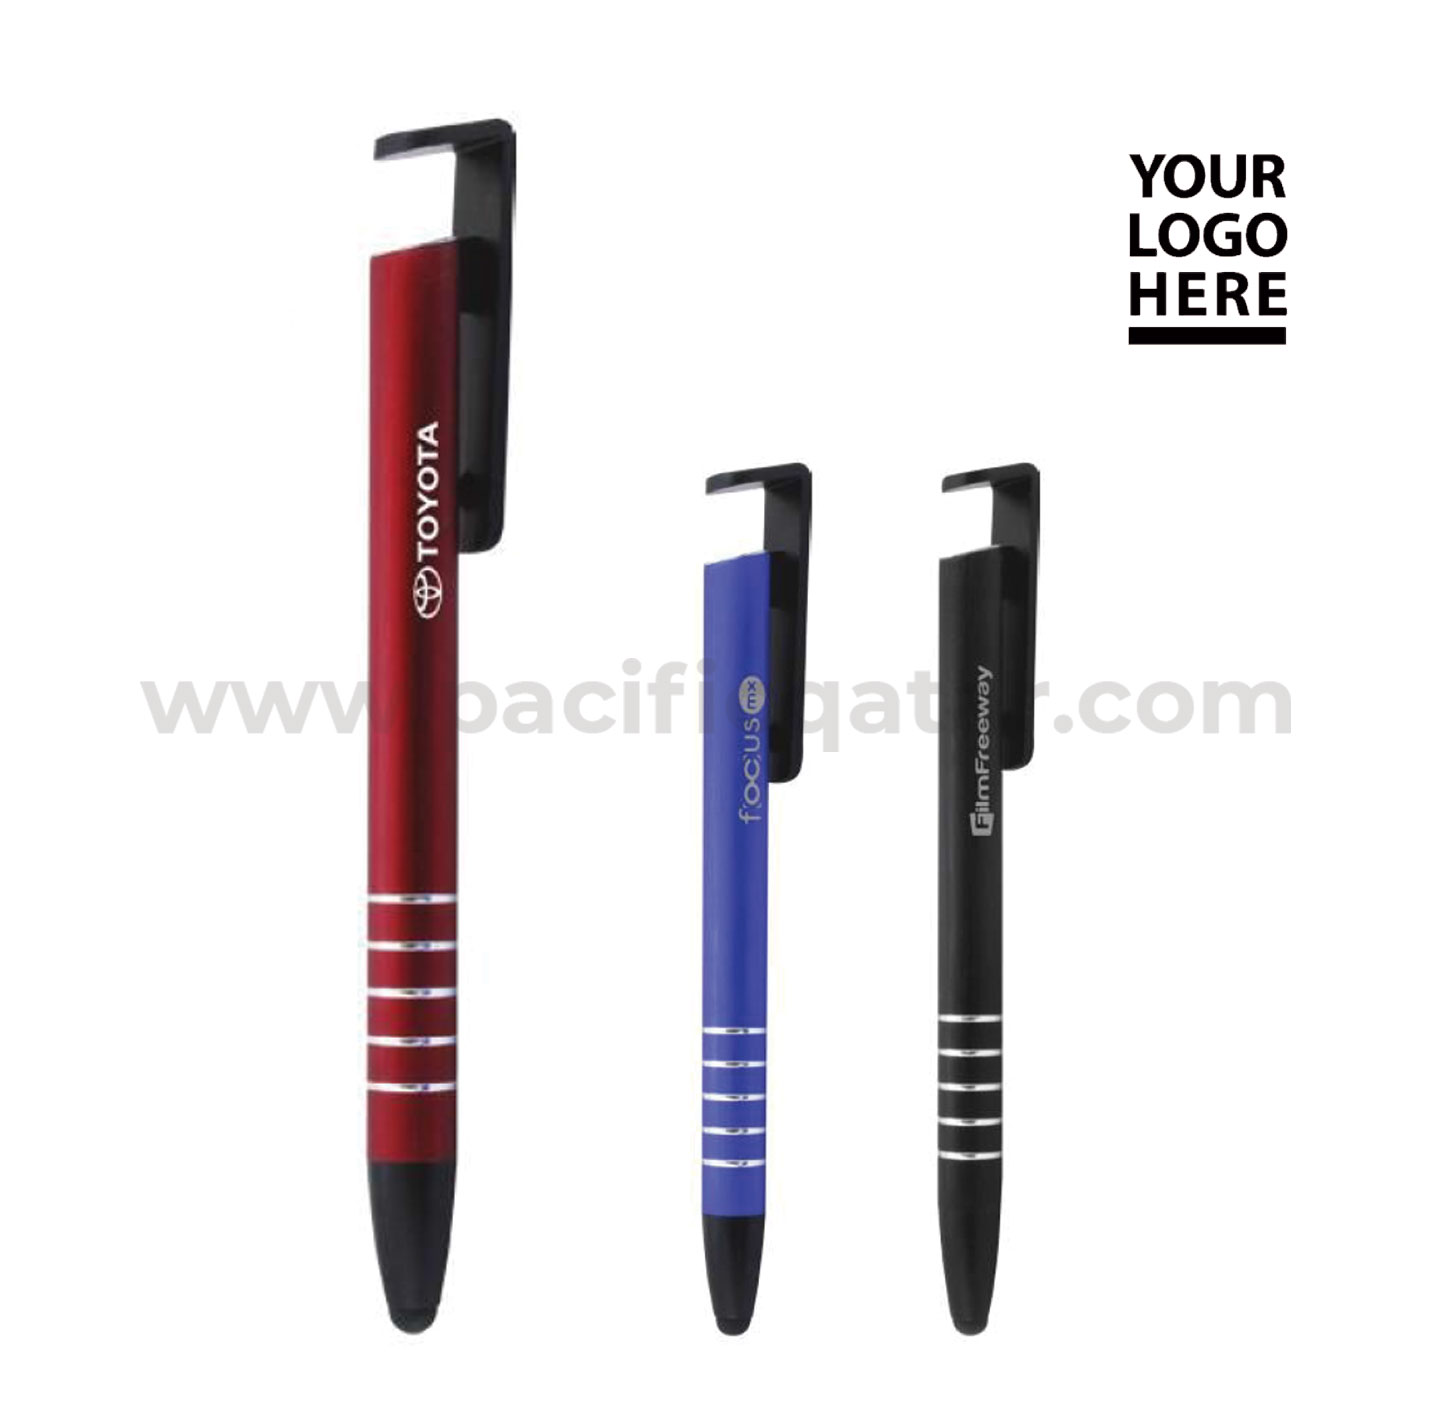 3 in 1 Metal Pen with Stylus & Phone Holder